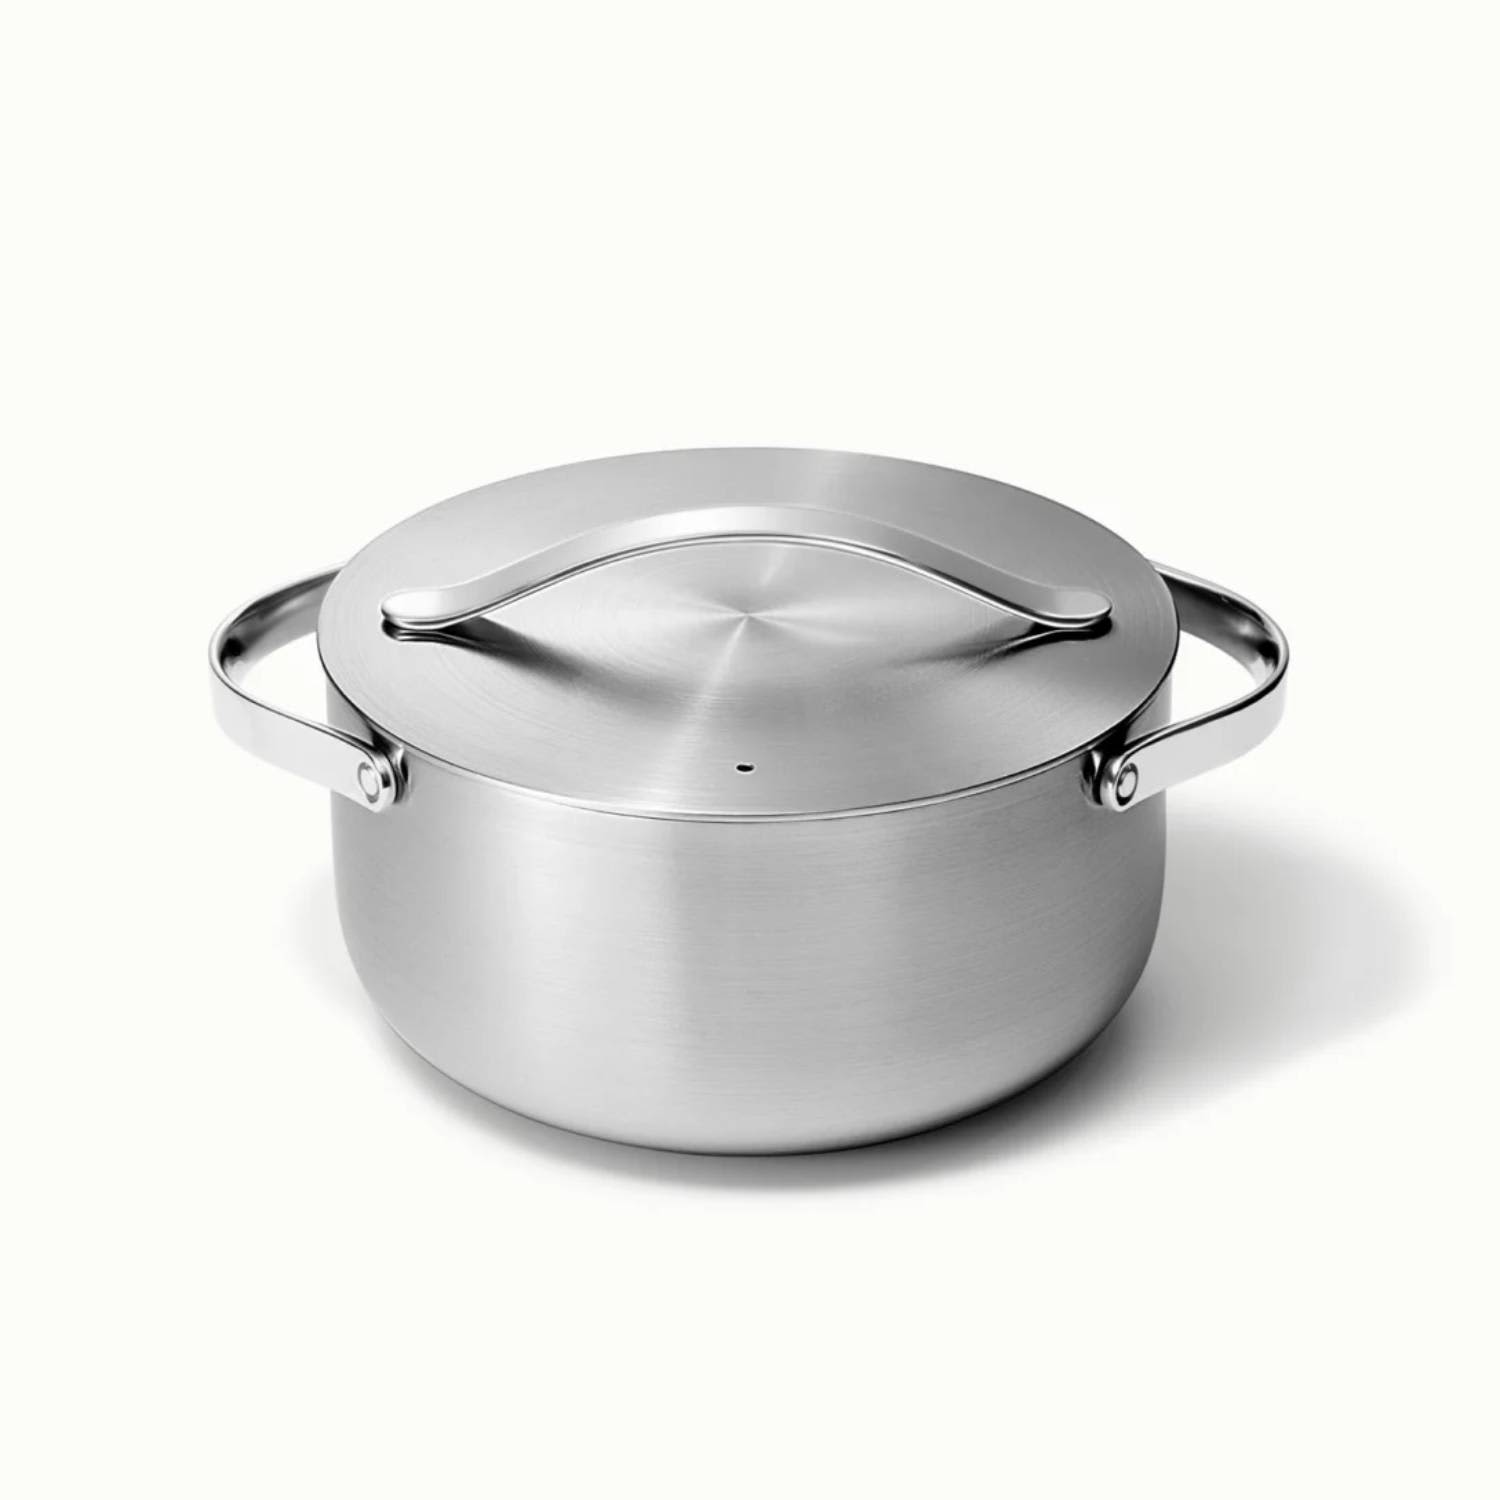 Caraway Stainless Steel Dutch Oven Cookware Review 2023 (Tested, Photos)